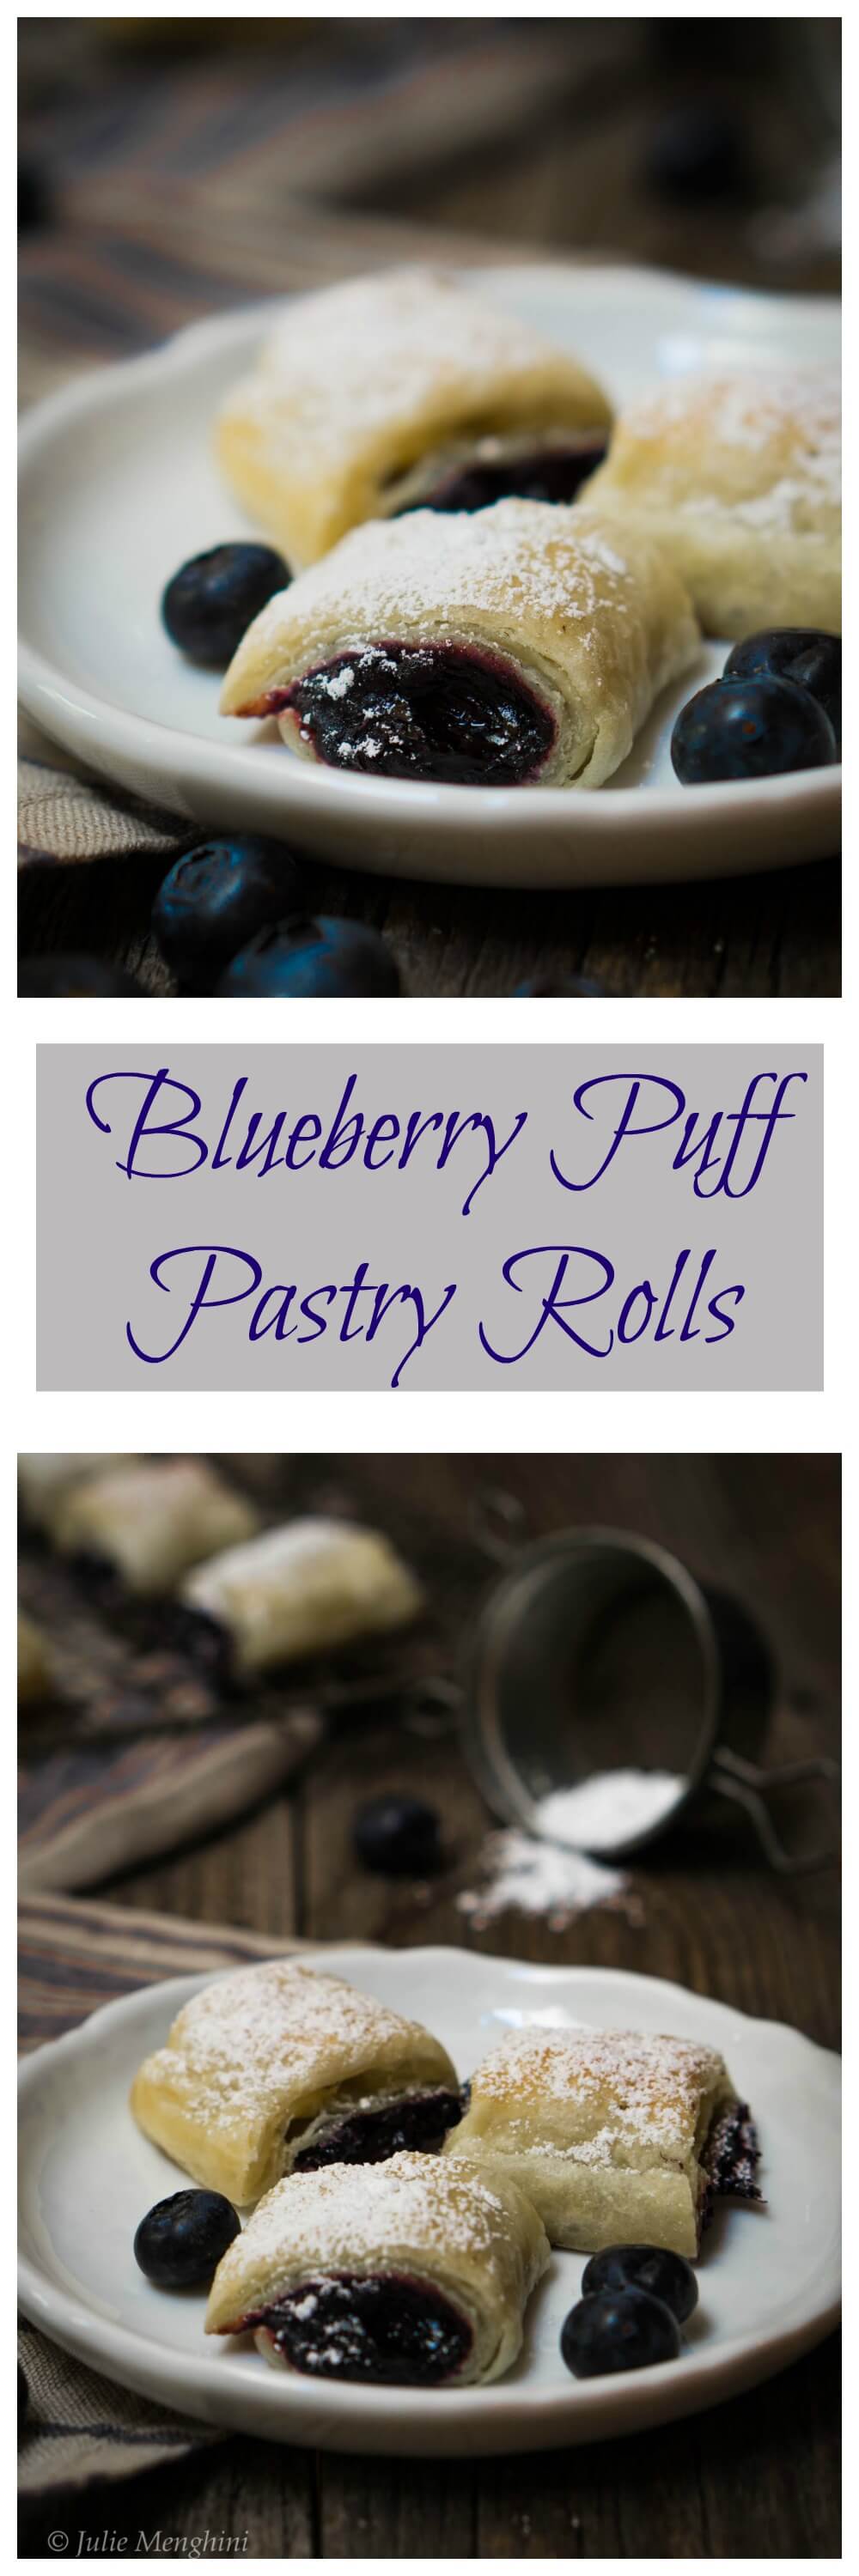 puff pastry wrapped around blueberry jam on a plate with blueberries on it